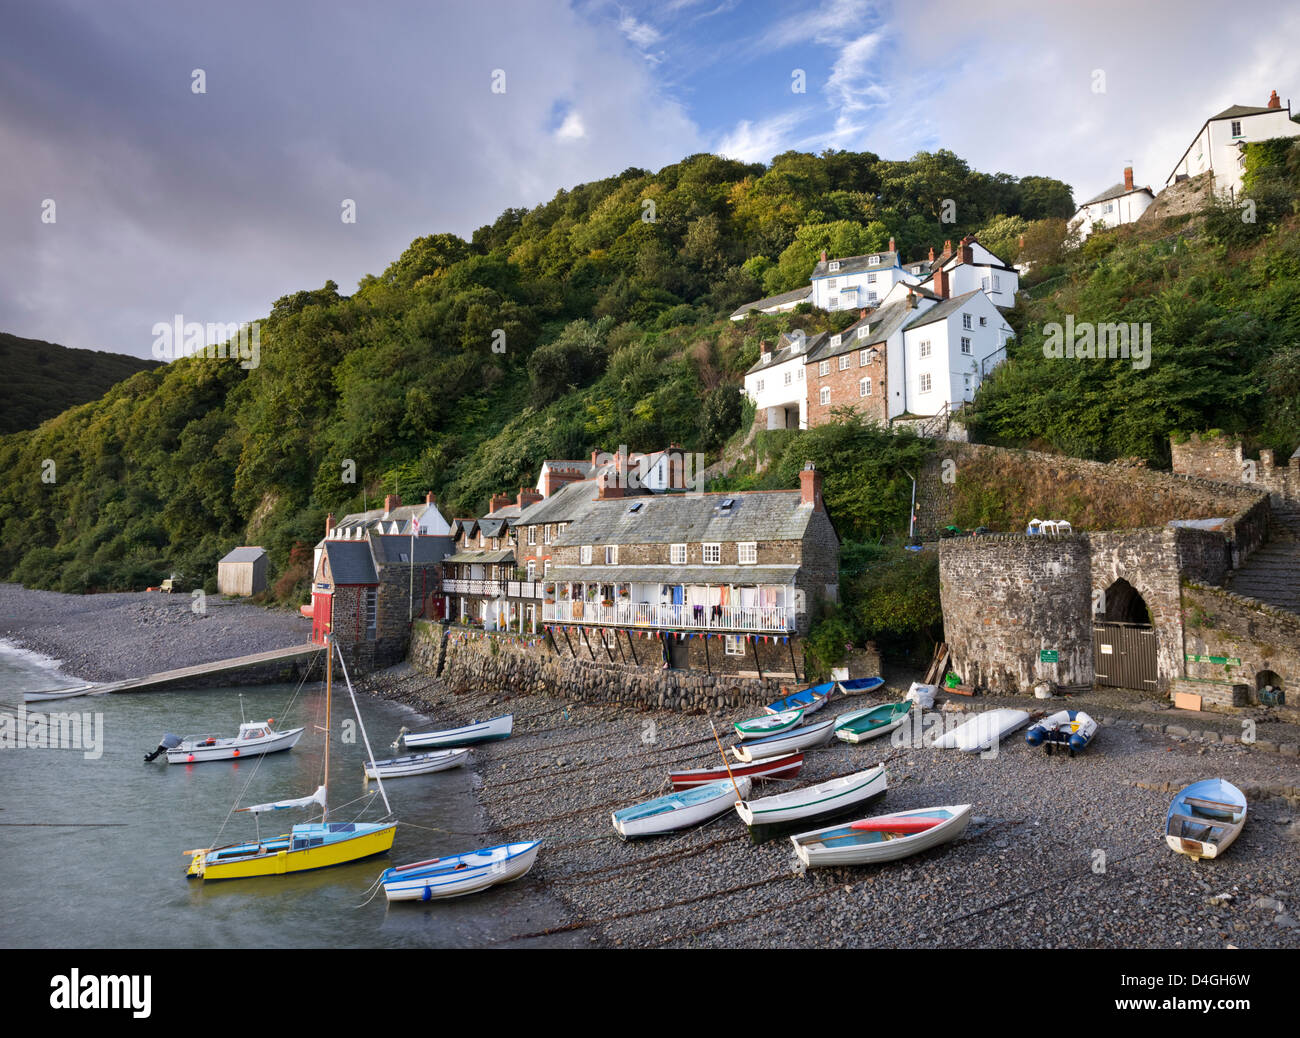 Picturesque fishing village of Clovelly, North Devon, England. Autumn (September). Stock Photo